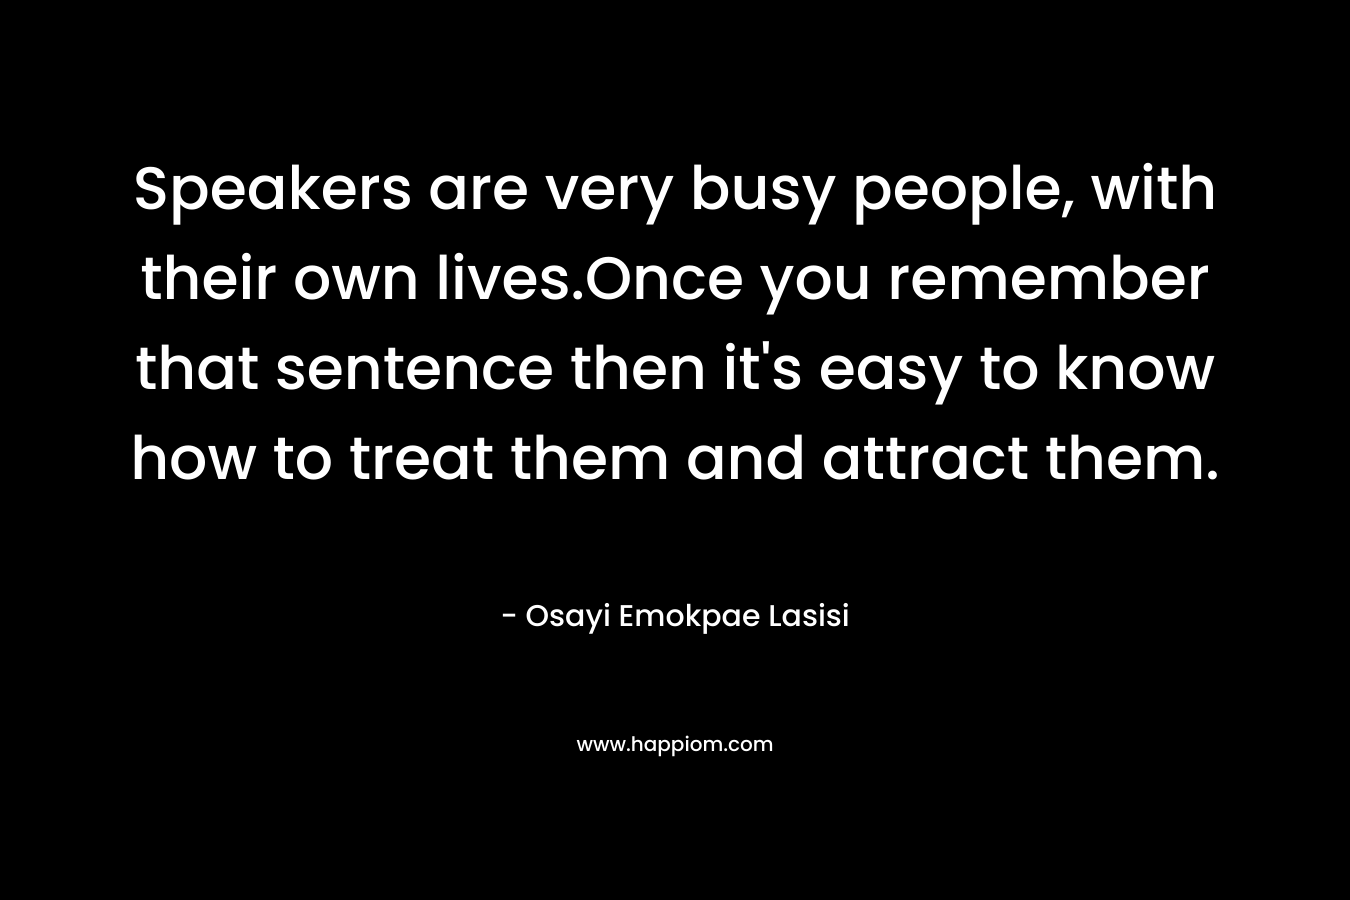 Speakers are very busy people, with their own lives.Once you remember that sentence then it’s easy to know how to treat them and attract them. – Osayi Emokpae Lasisi